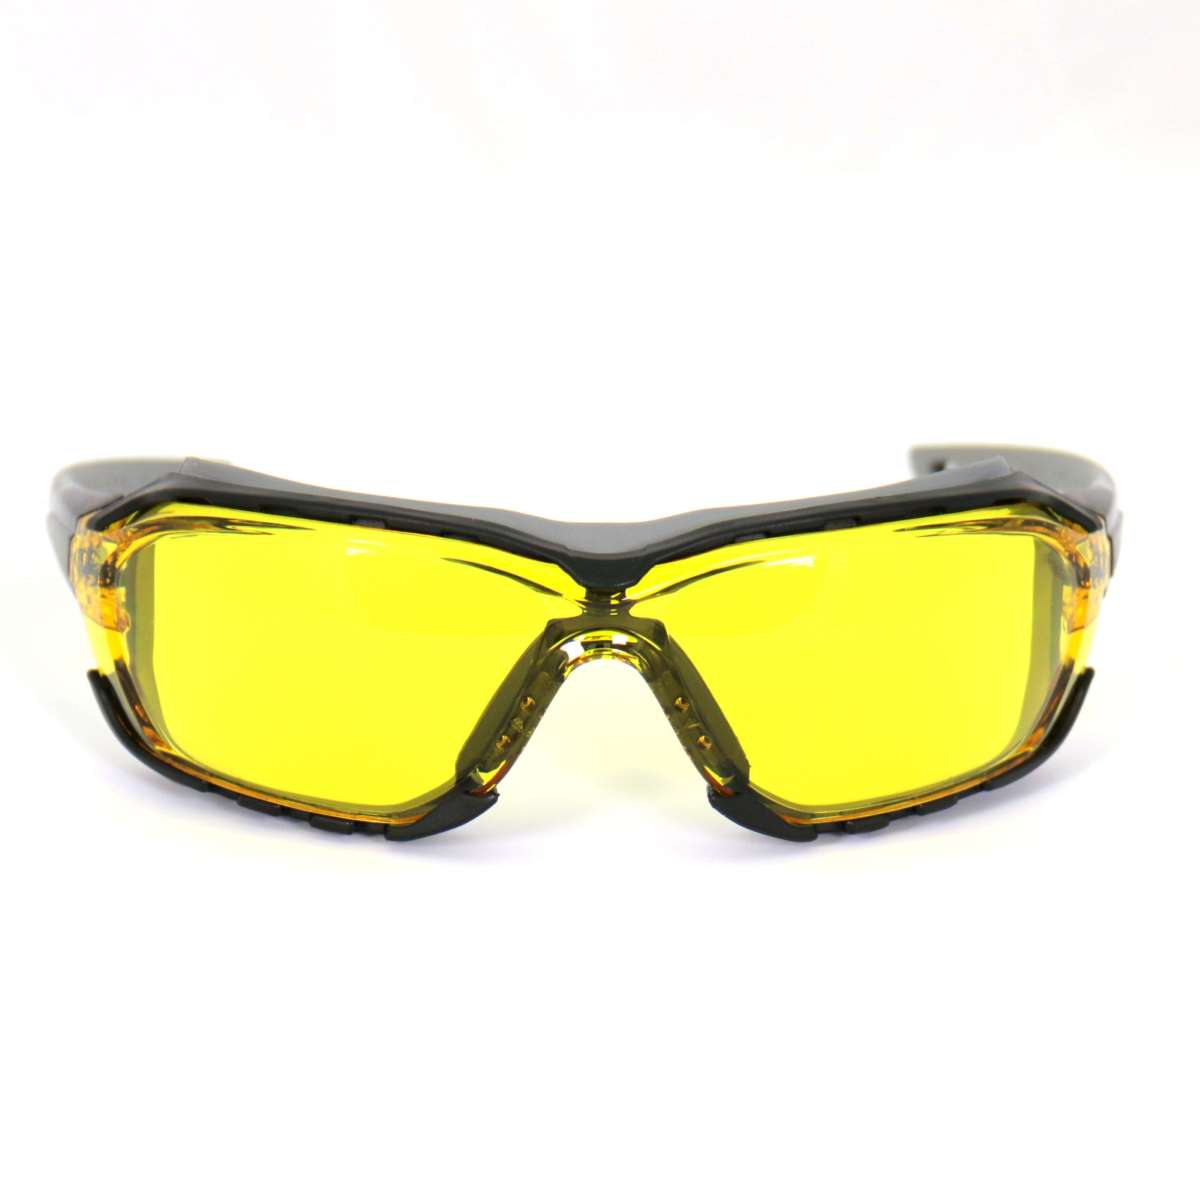 Hot Leathers Iceman Motorcycle Anti Fog Safety Sunglasses SGF1060